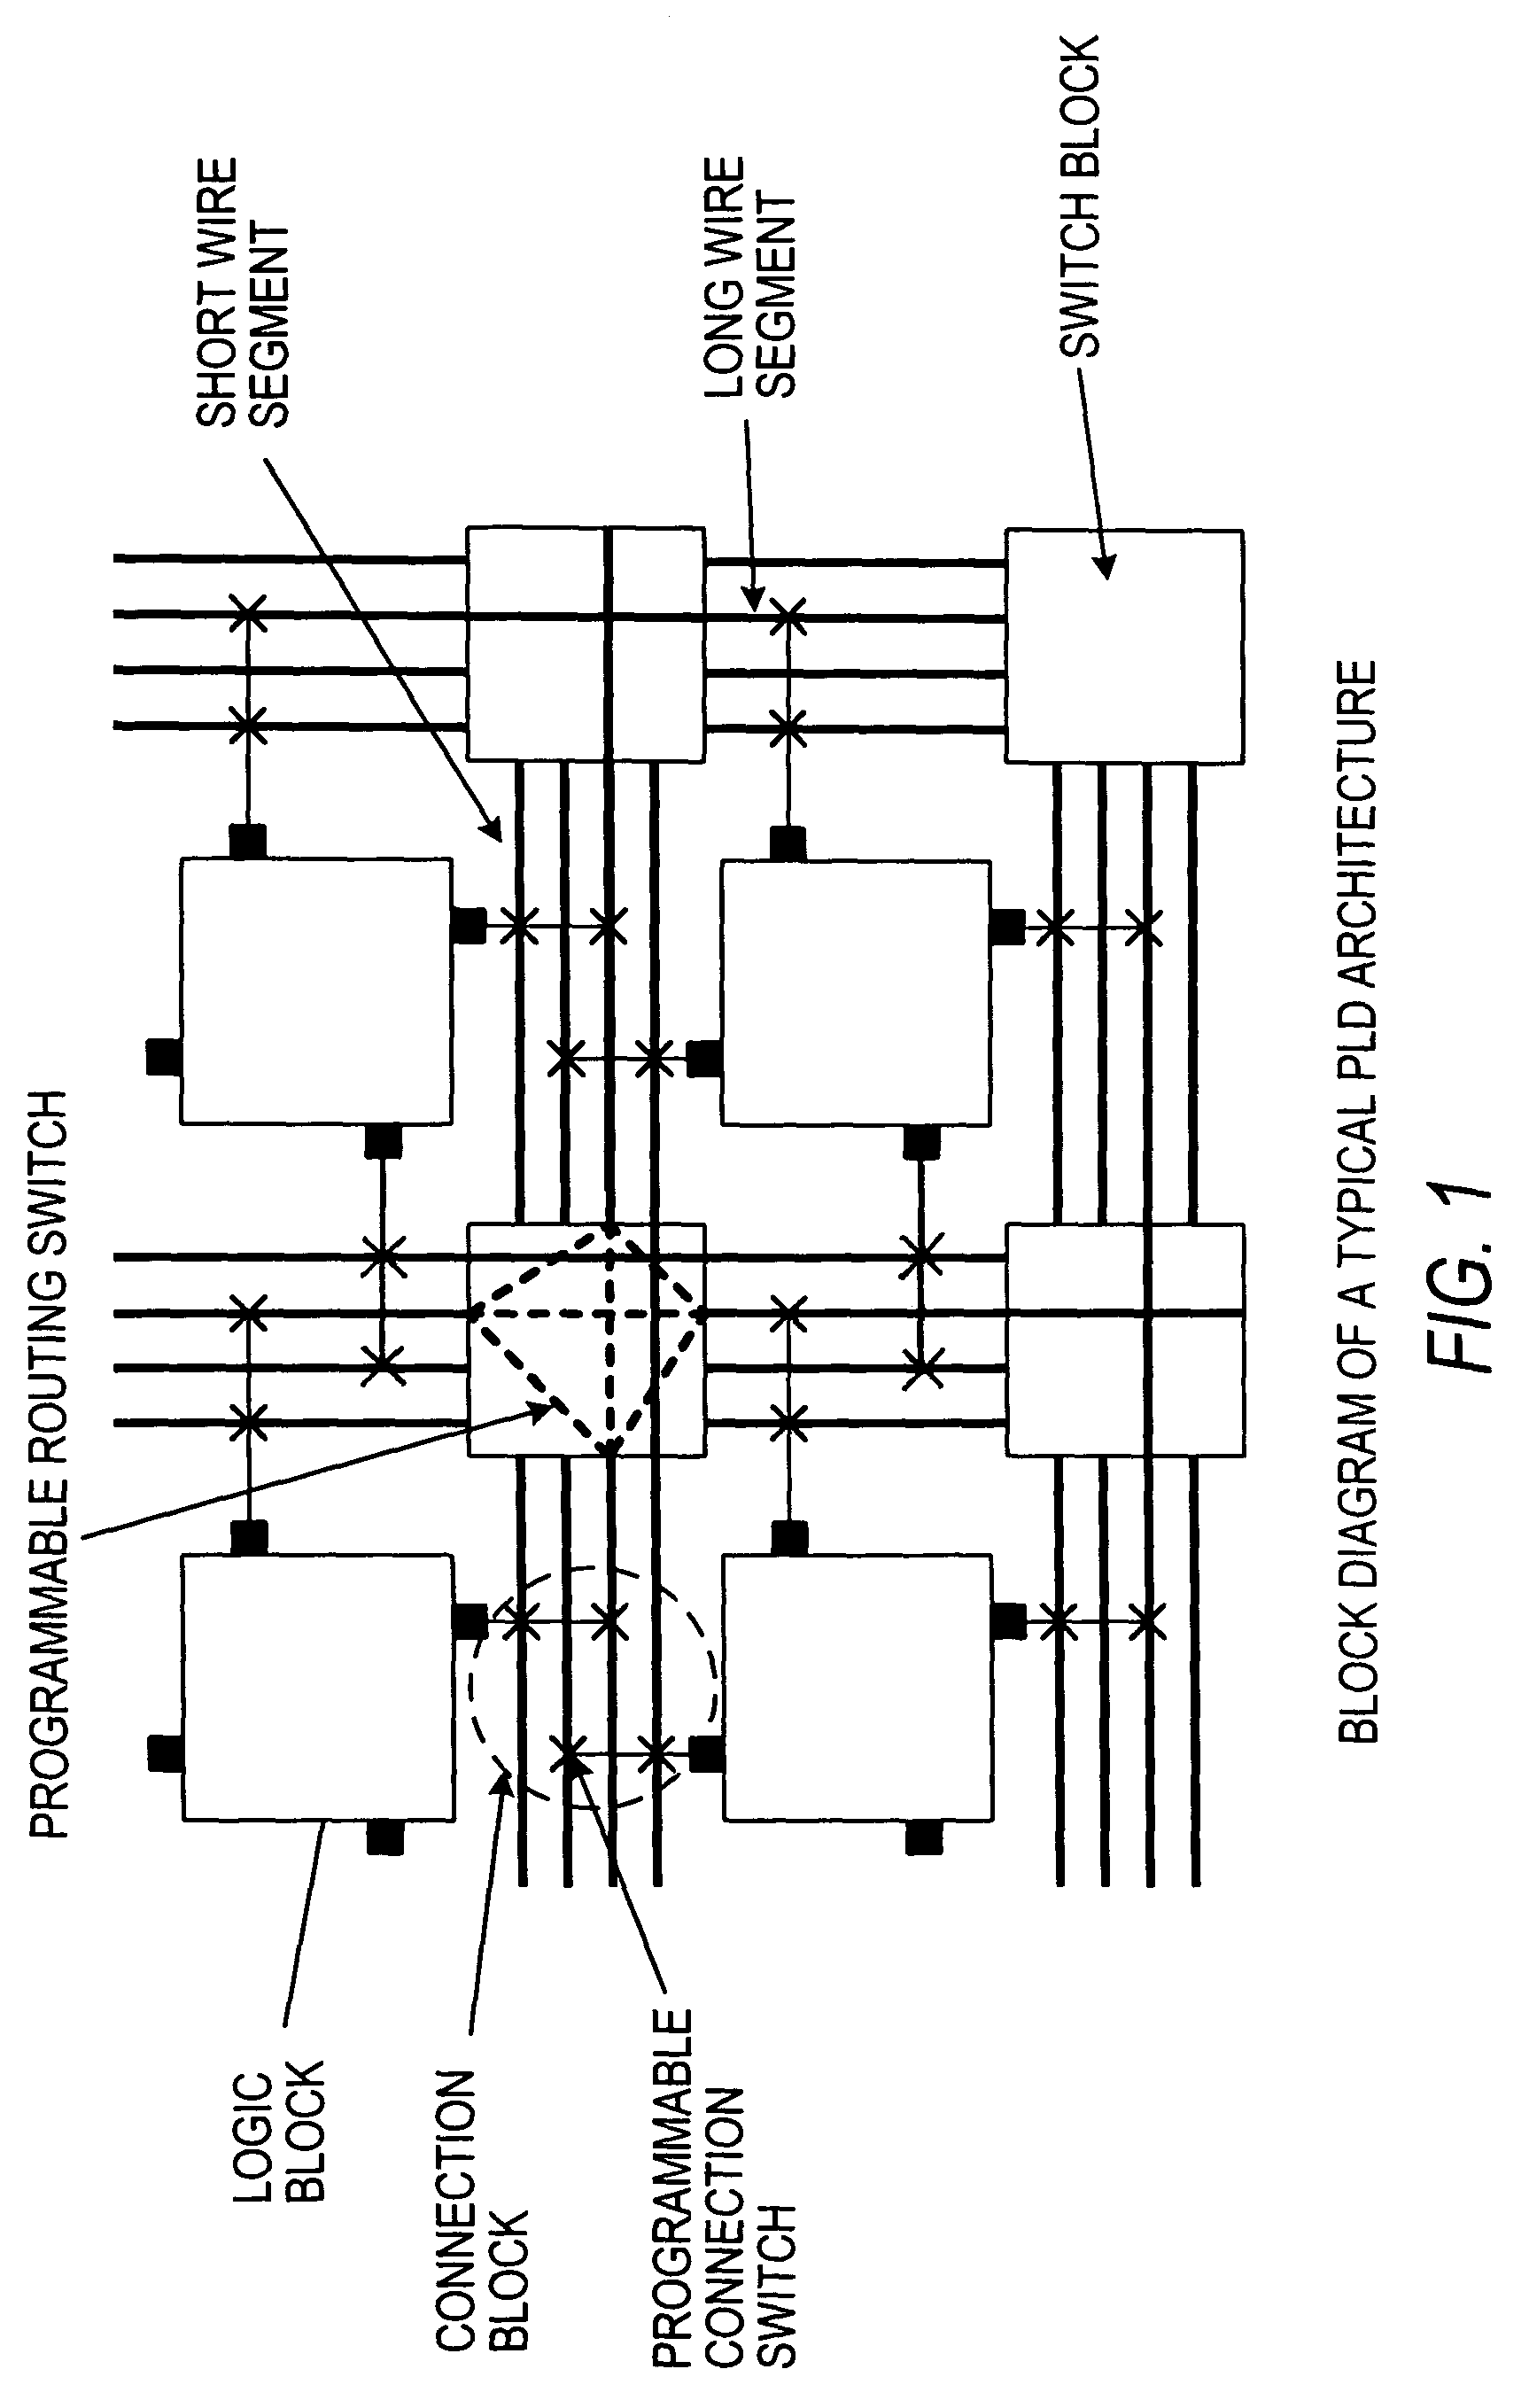 Automatic generation of programmable logic device architectures